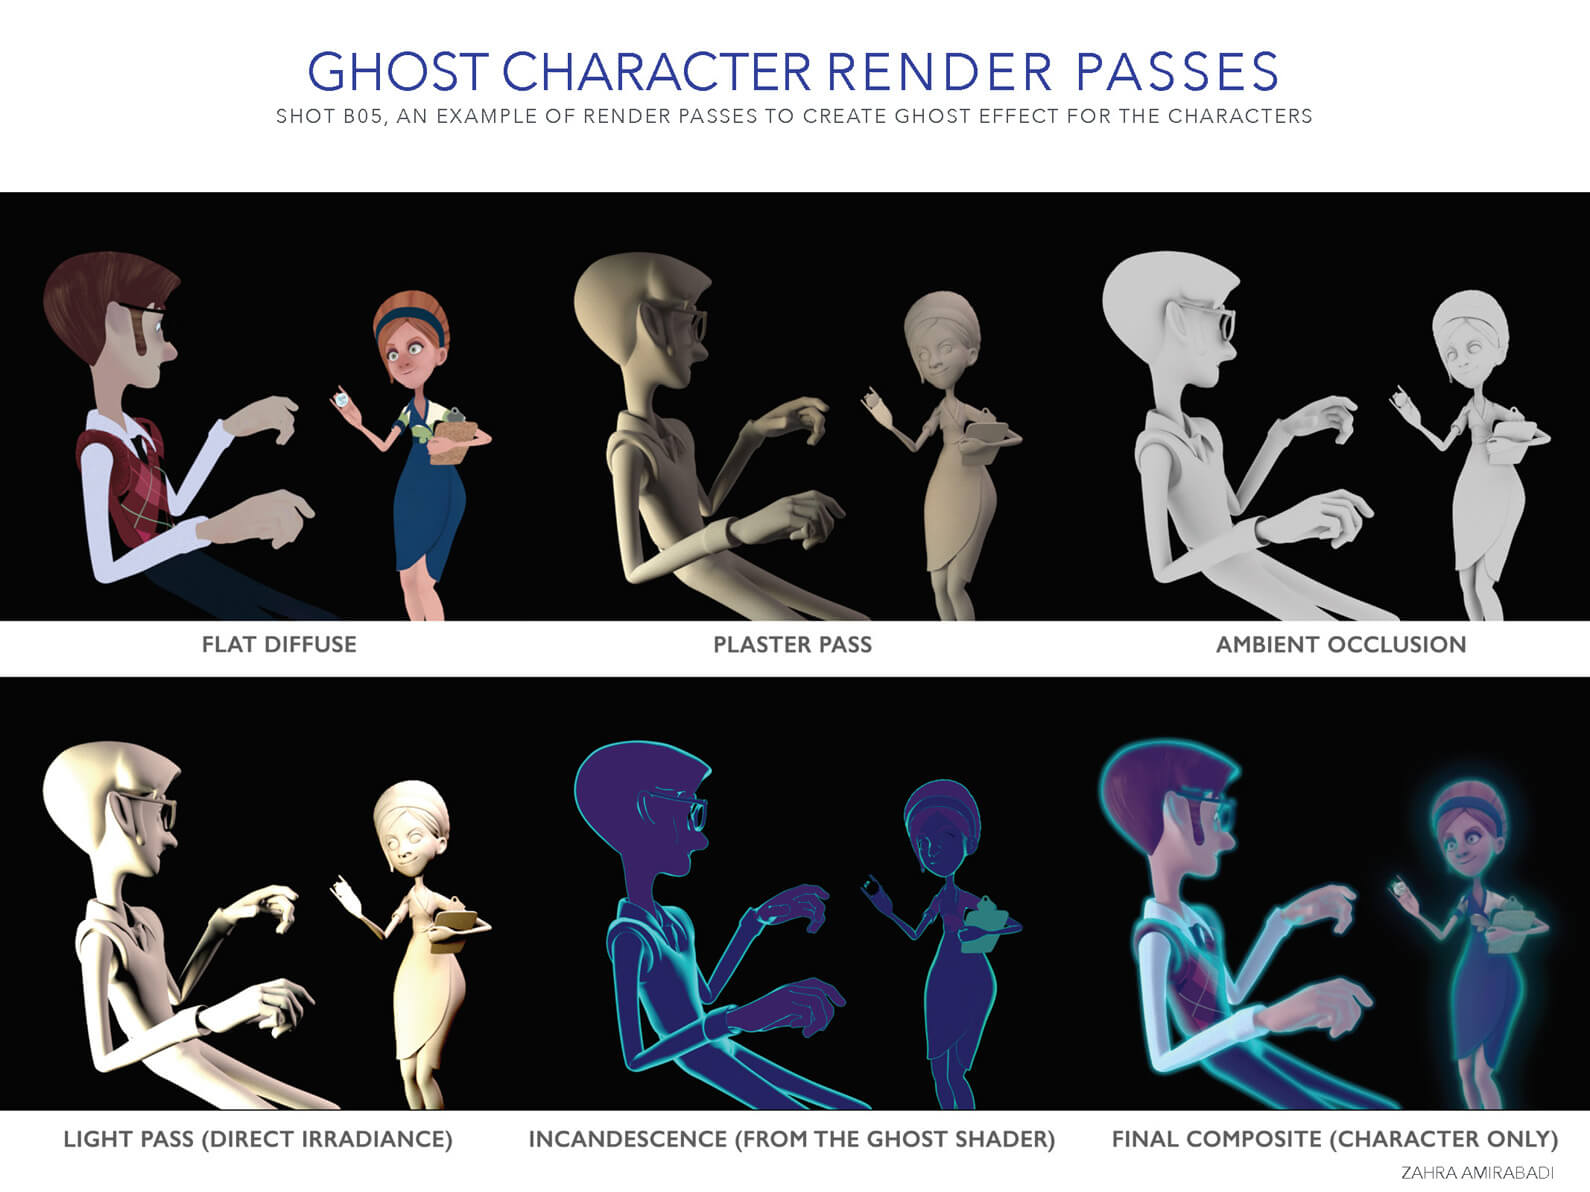 Various stages of rendering passes of the man and woman ghosts in Orientation center for the Unseen